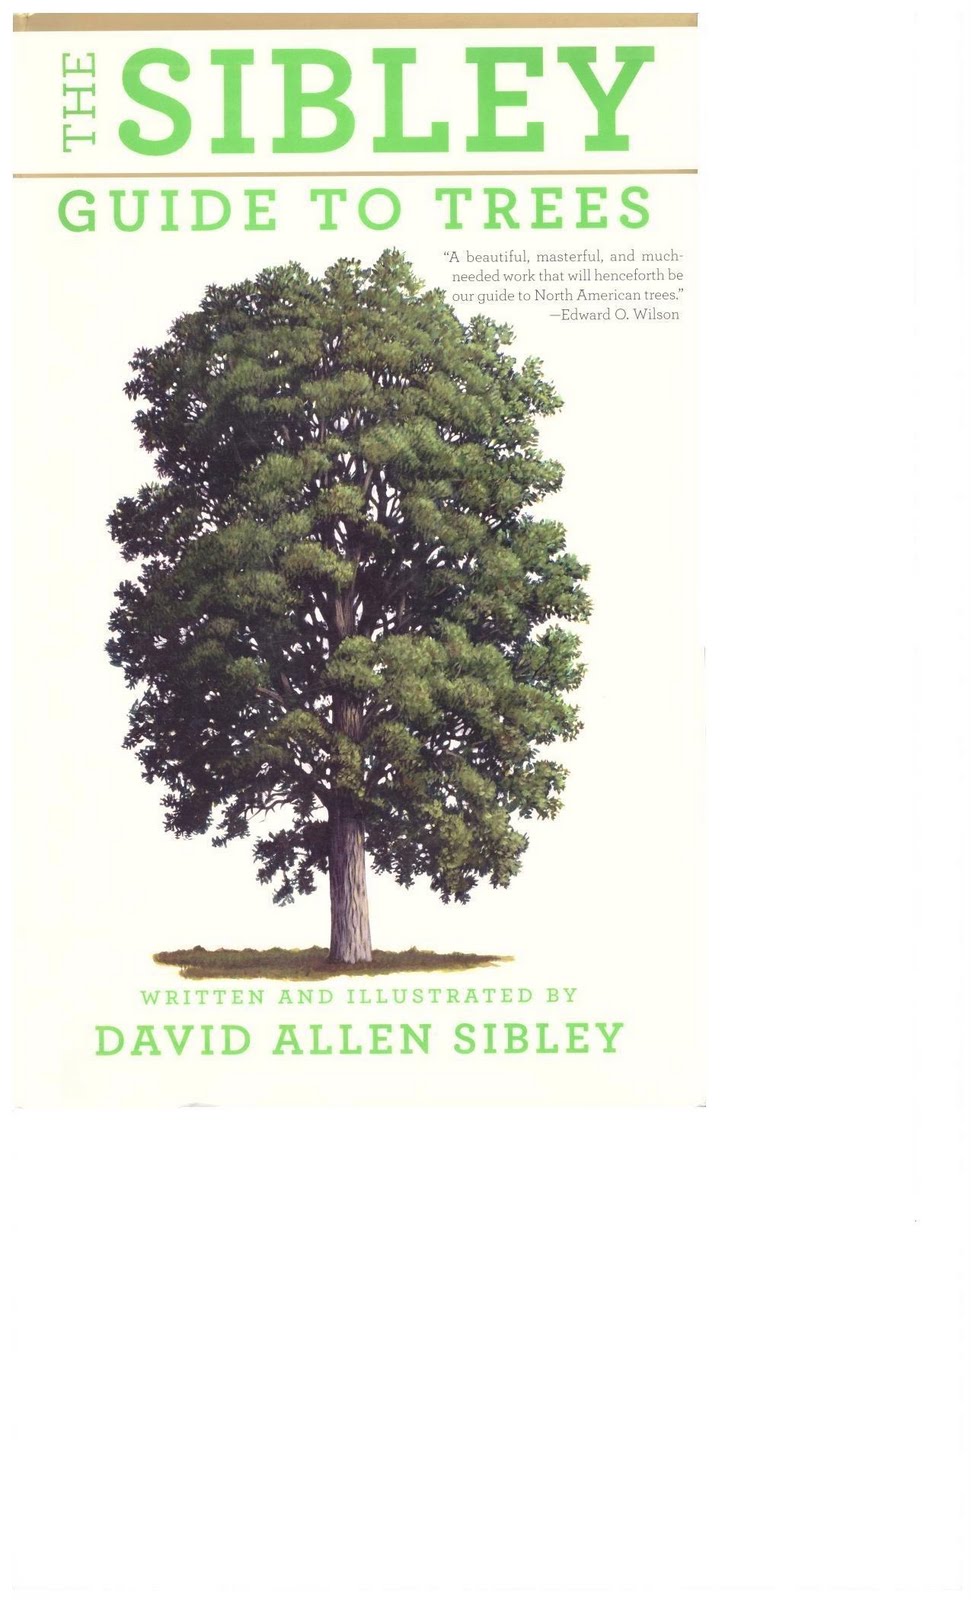 [The+Sibley+Guide+to+Trees.jpg]